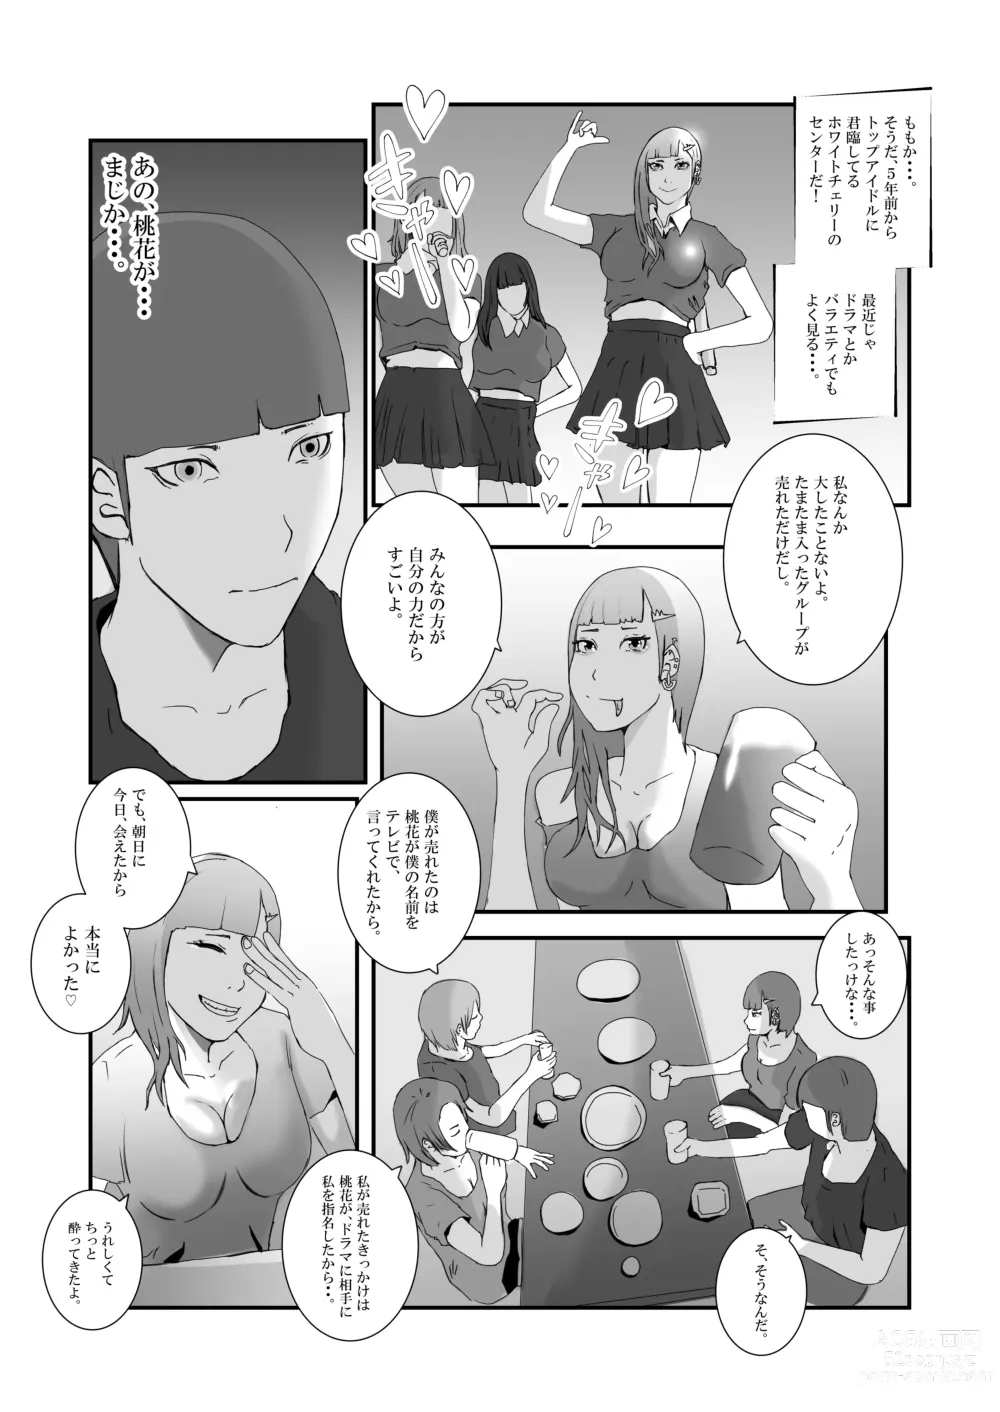 Page 11 of doujinshi Serious sex with a popular idol in the toilet during a class reunion. From cleaning blowjob to creampie..